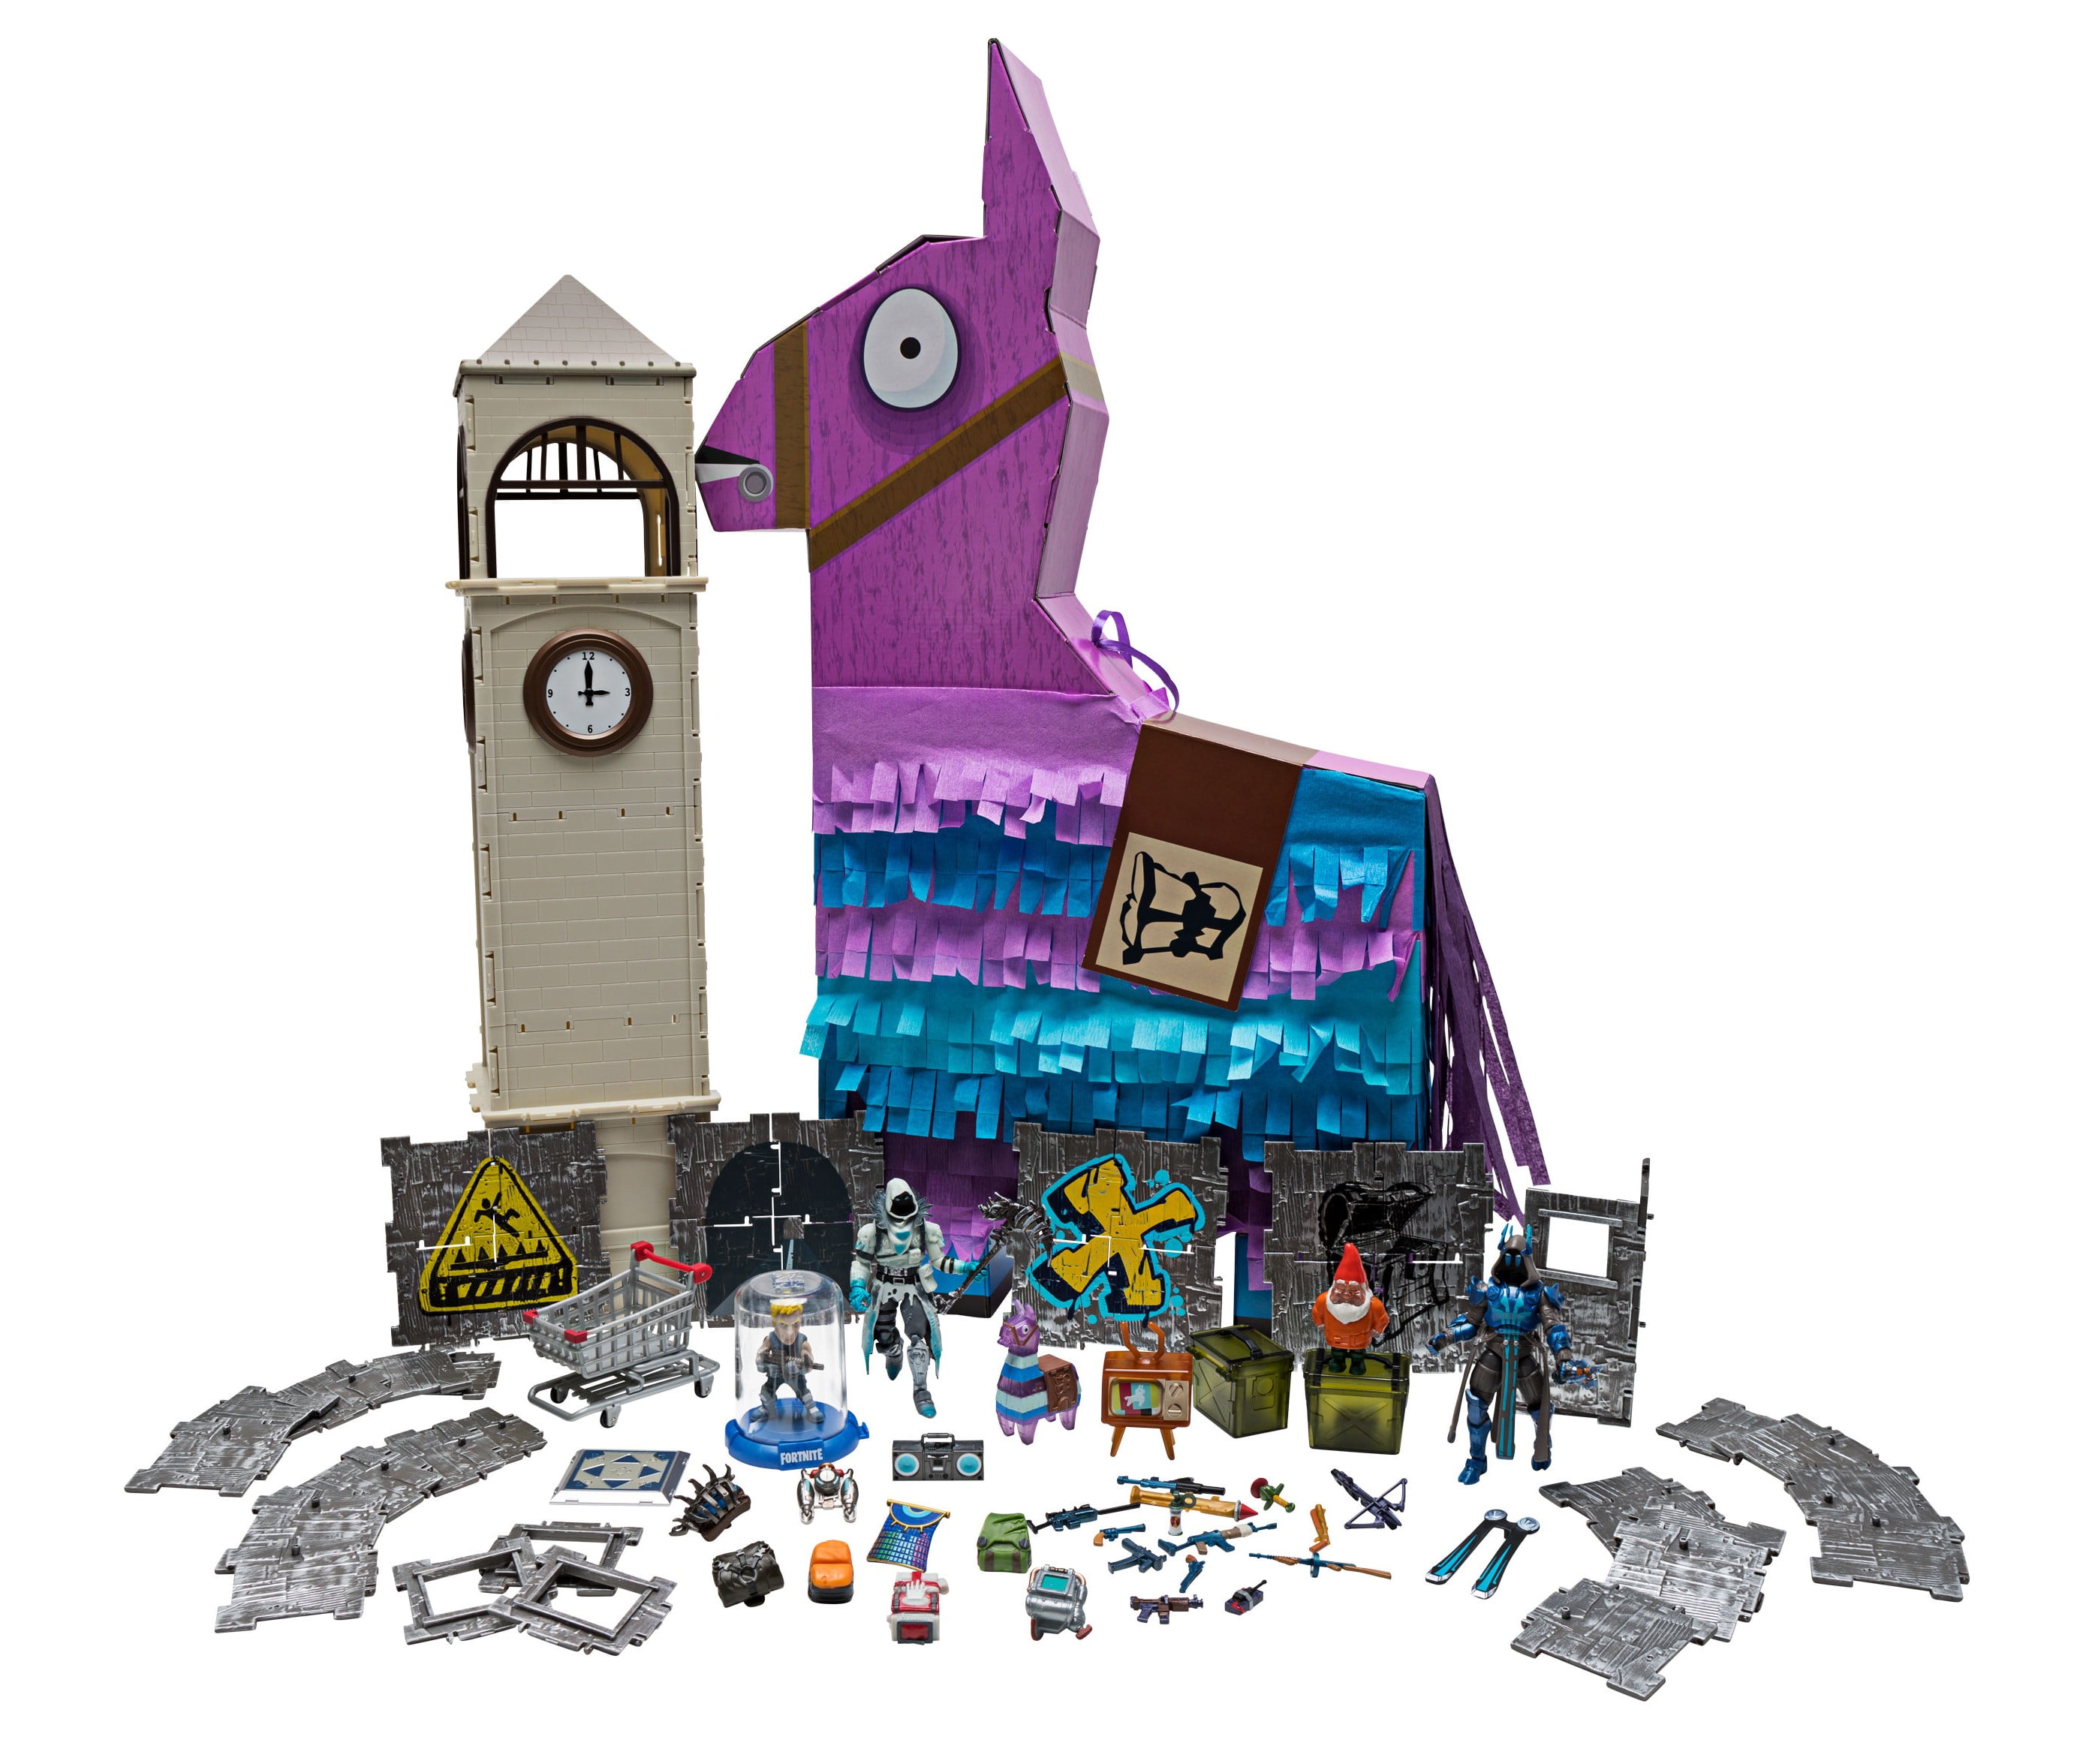 2 Figure Pack and More Including 10 Weapons Featuring Ruin and 8-Ball 4” Action Figures 22 Building Material Pieces 8 Back Blings 2 Harvesting Tools Fortnite Large Vending Machine